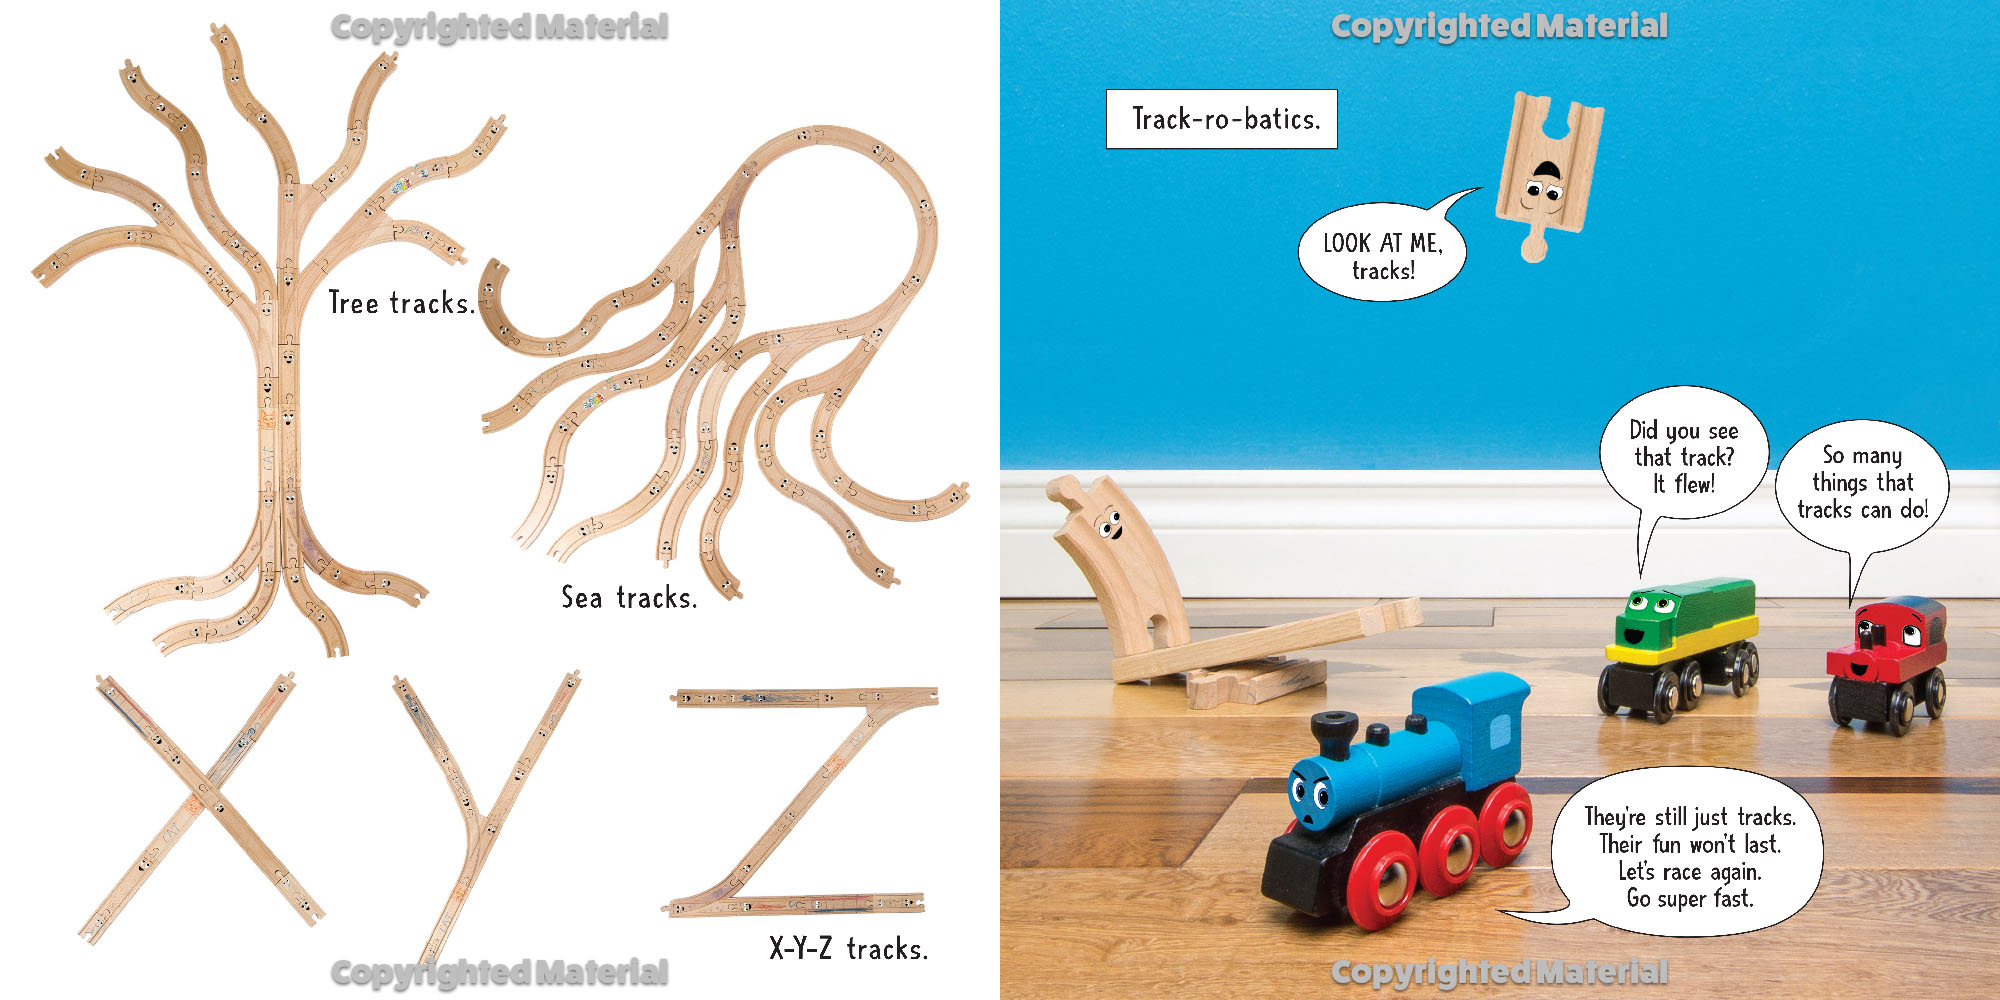 OLD TRACKS, NEW TRICKS by Jessica Petersen: a wooden train picture book that encourages creative play